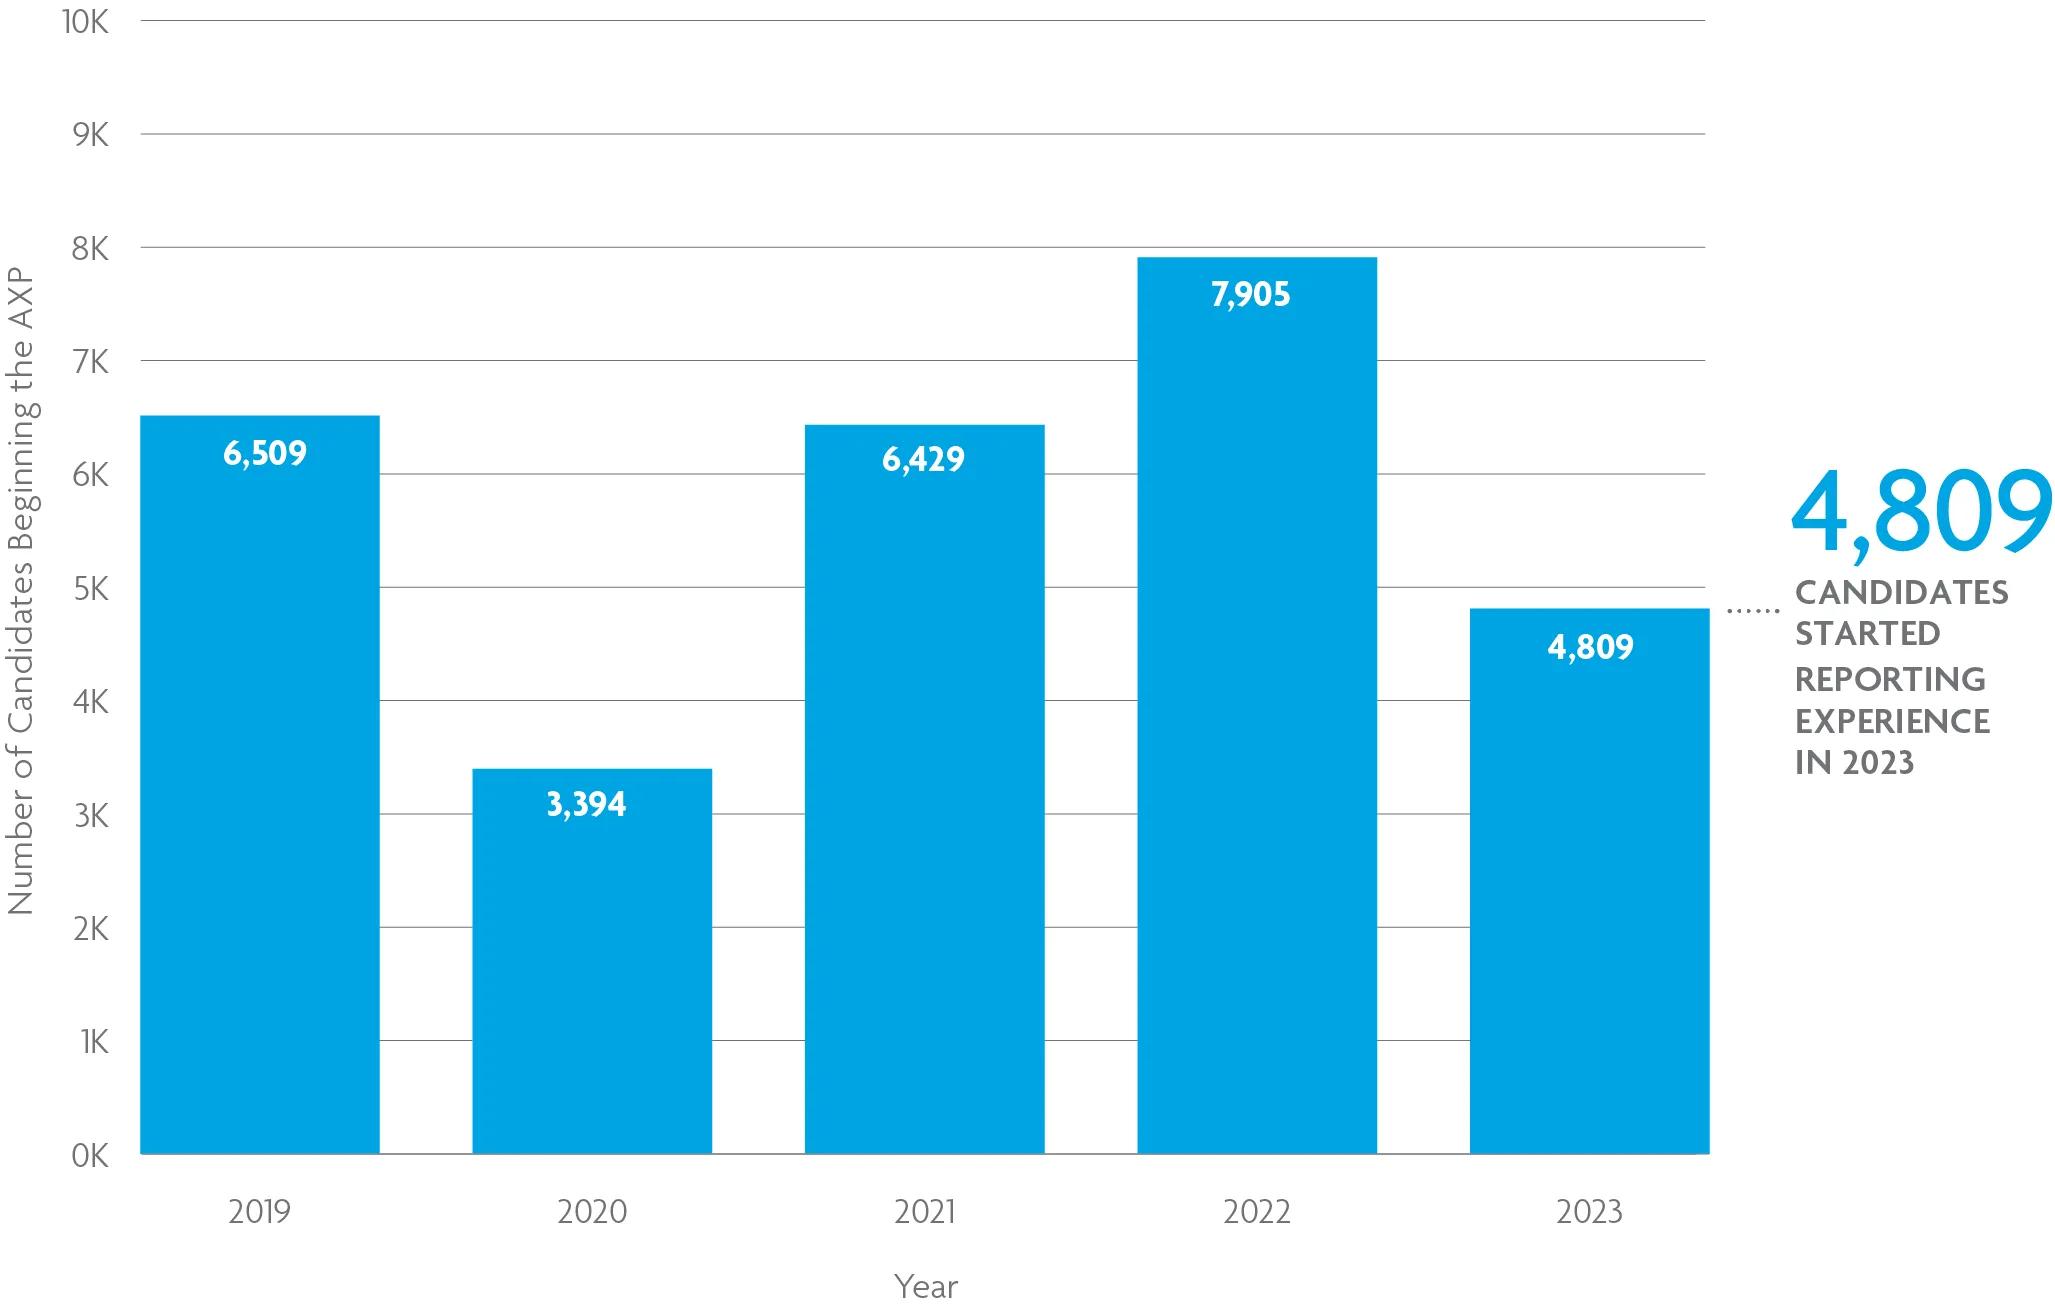 A bar chart shows that nearly 5,000 candidates started the experience program in 2023. For help with data accessibility, contact communications@ncarb.org